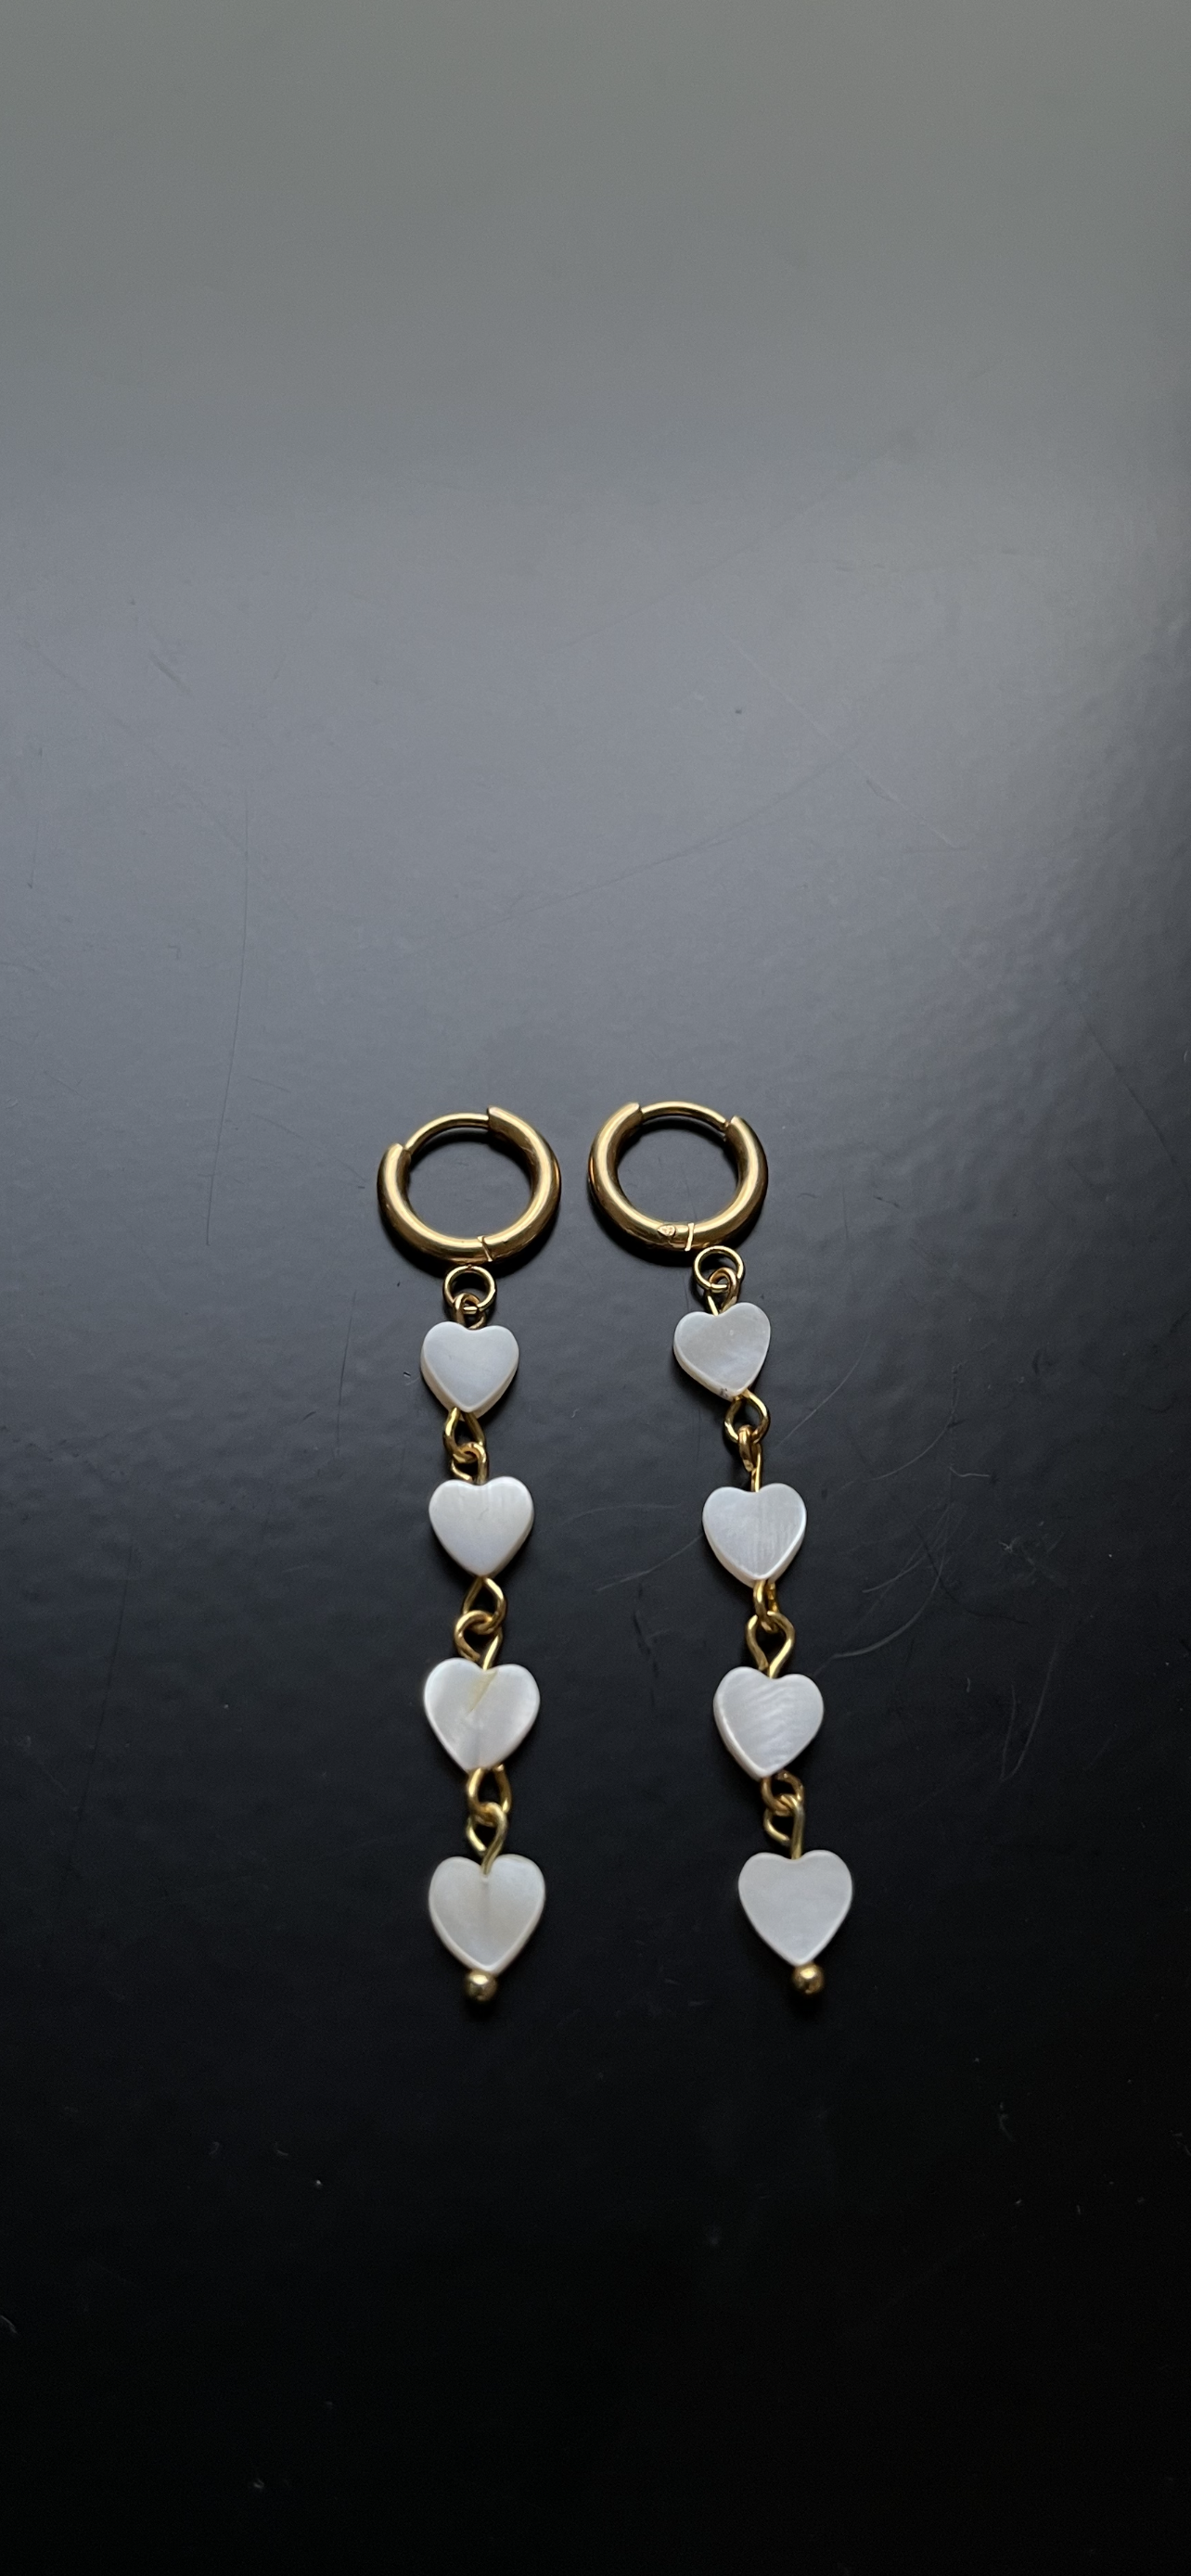 The "Willow" Earrings